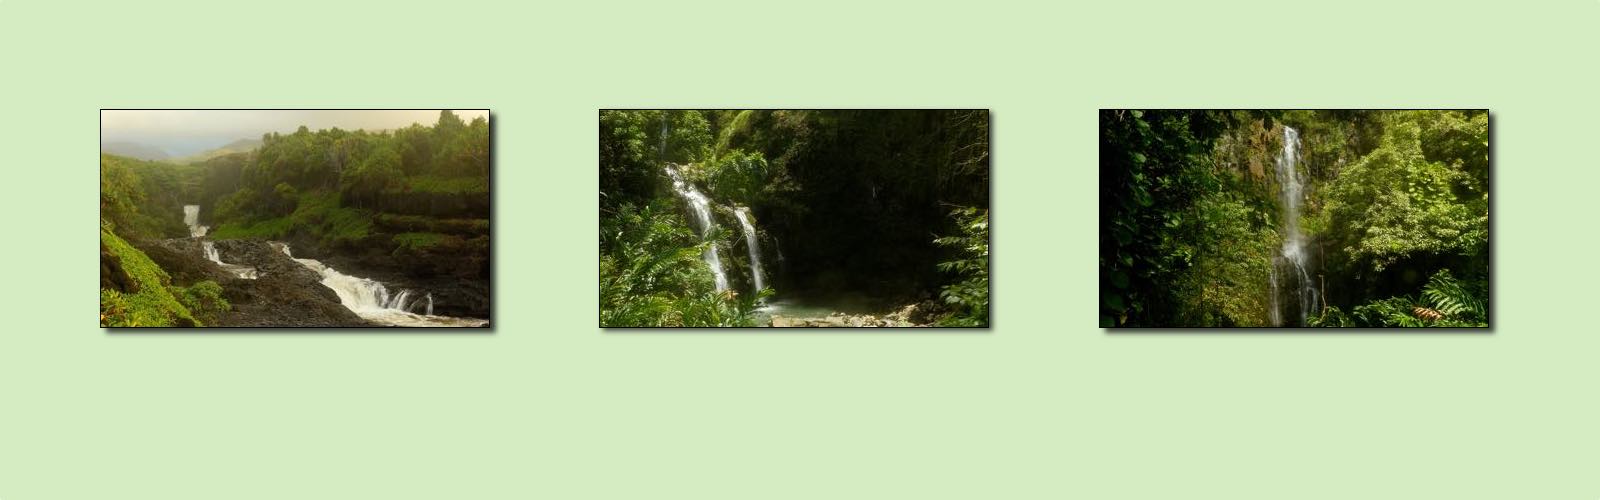 About - Waterfalls, Streams & Lakes